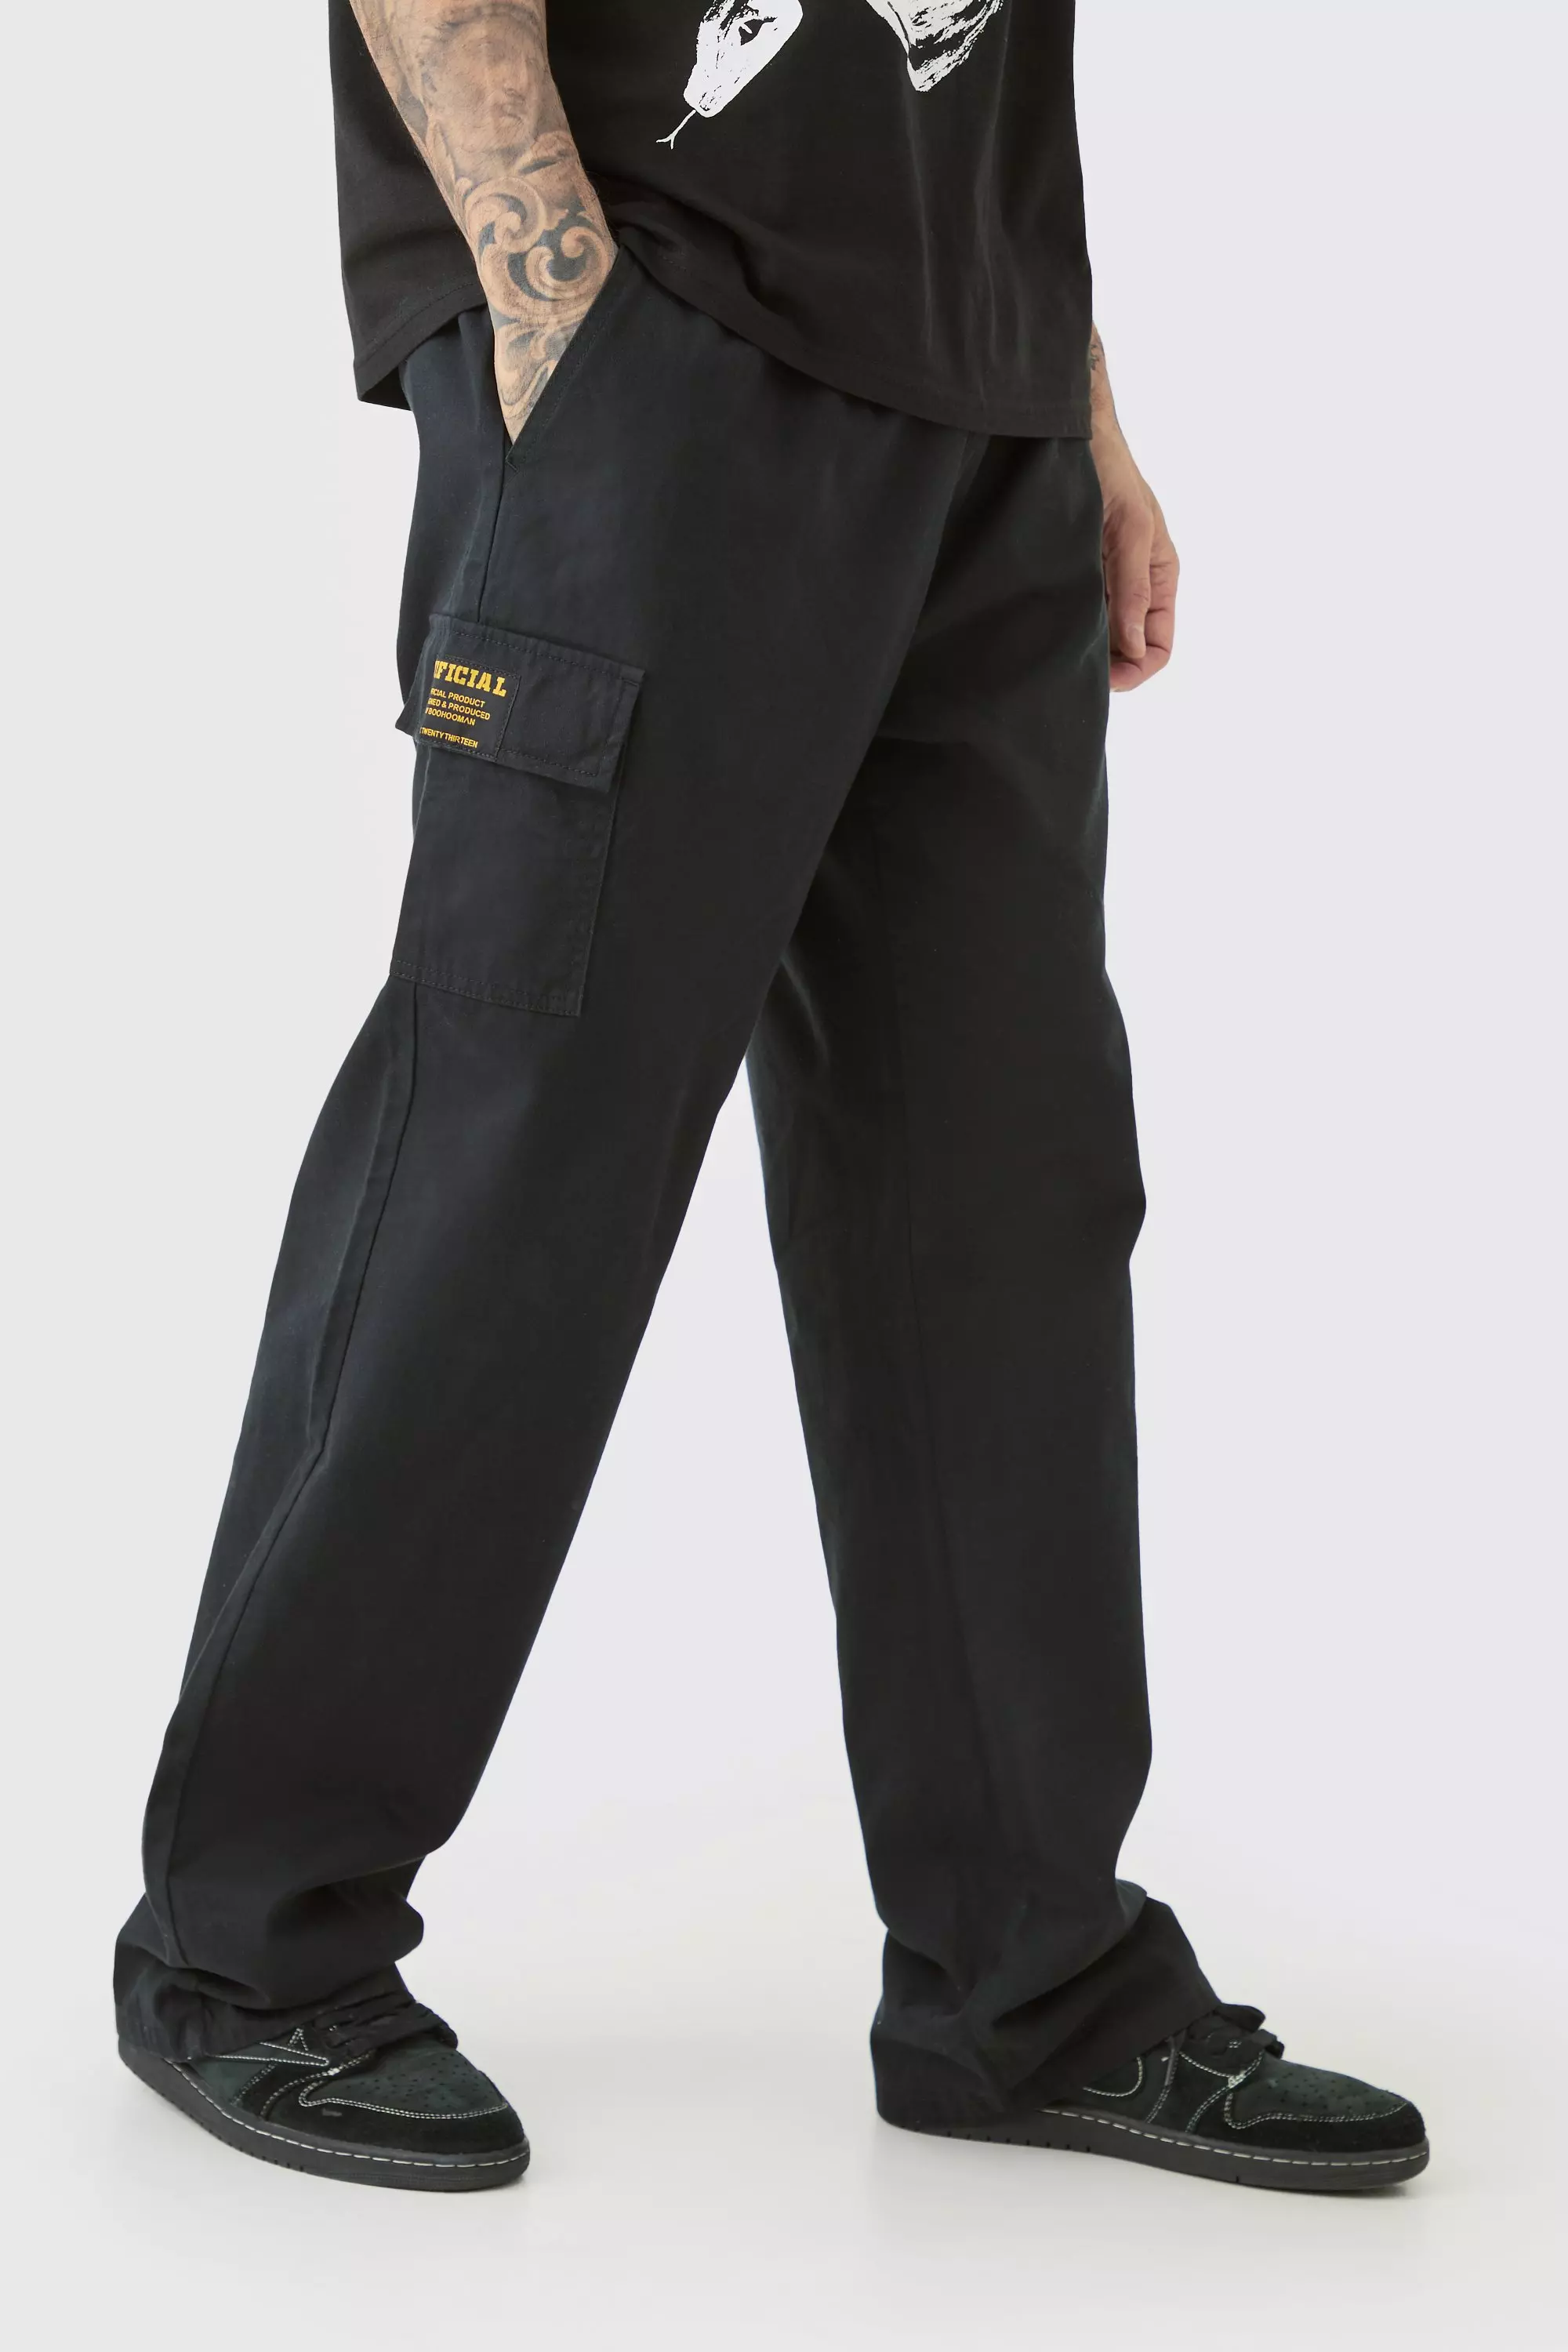 Black Tall Elastic Waist Twil Relaxed Fit Cargo Tab Trouser